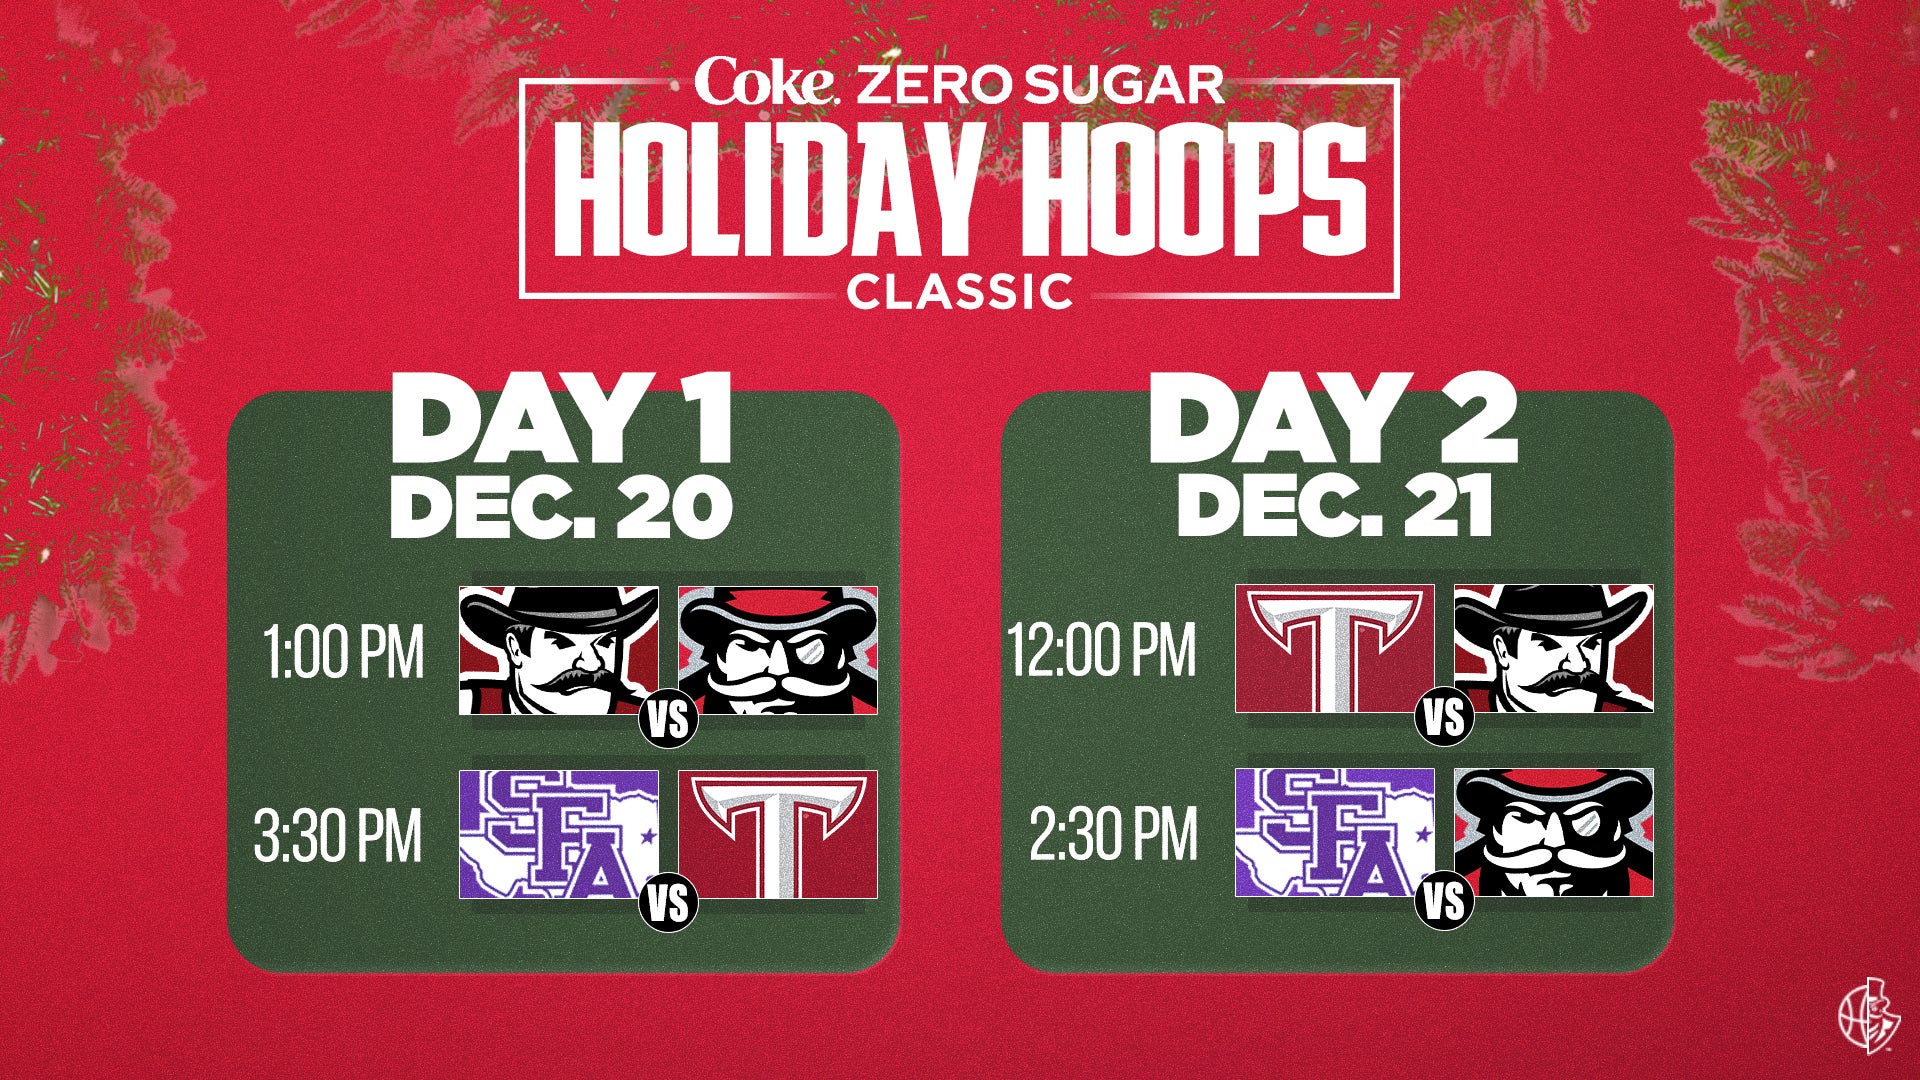 Holiday Hoops Classic - Day 2